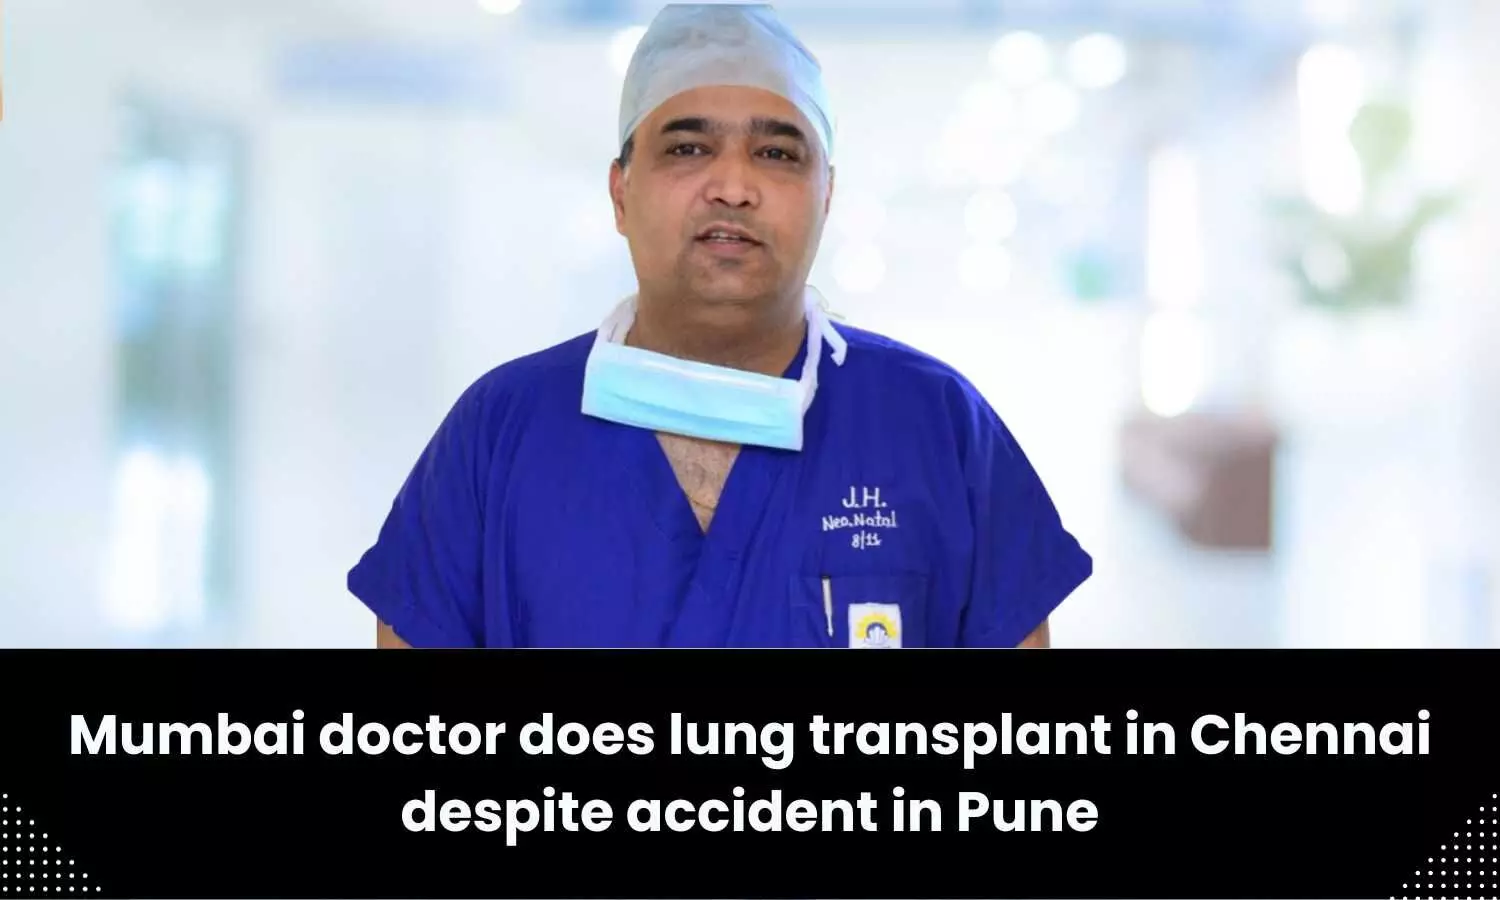 Cardiothoracic Surgeon performs lung transplant in Chennai despite ambulance accident in Pune